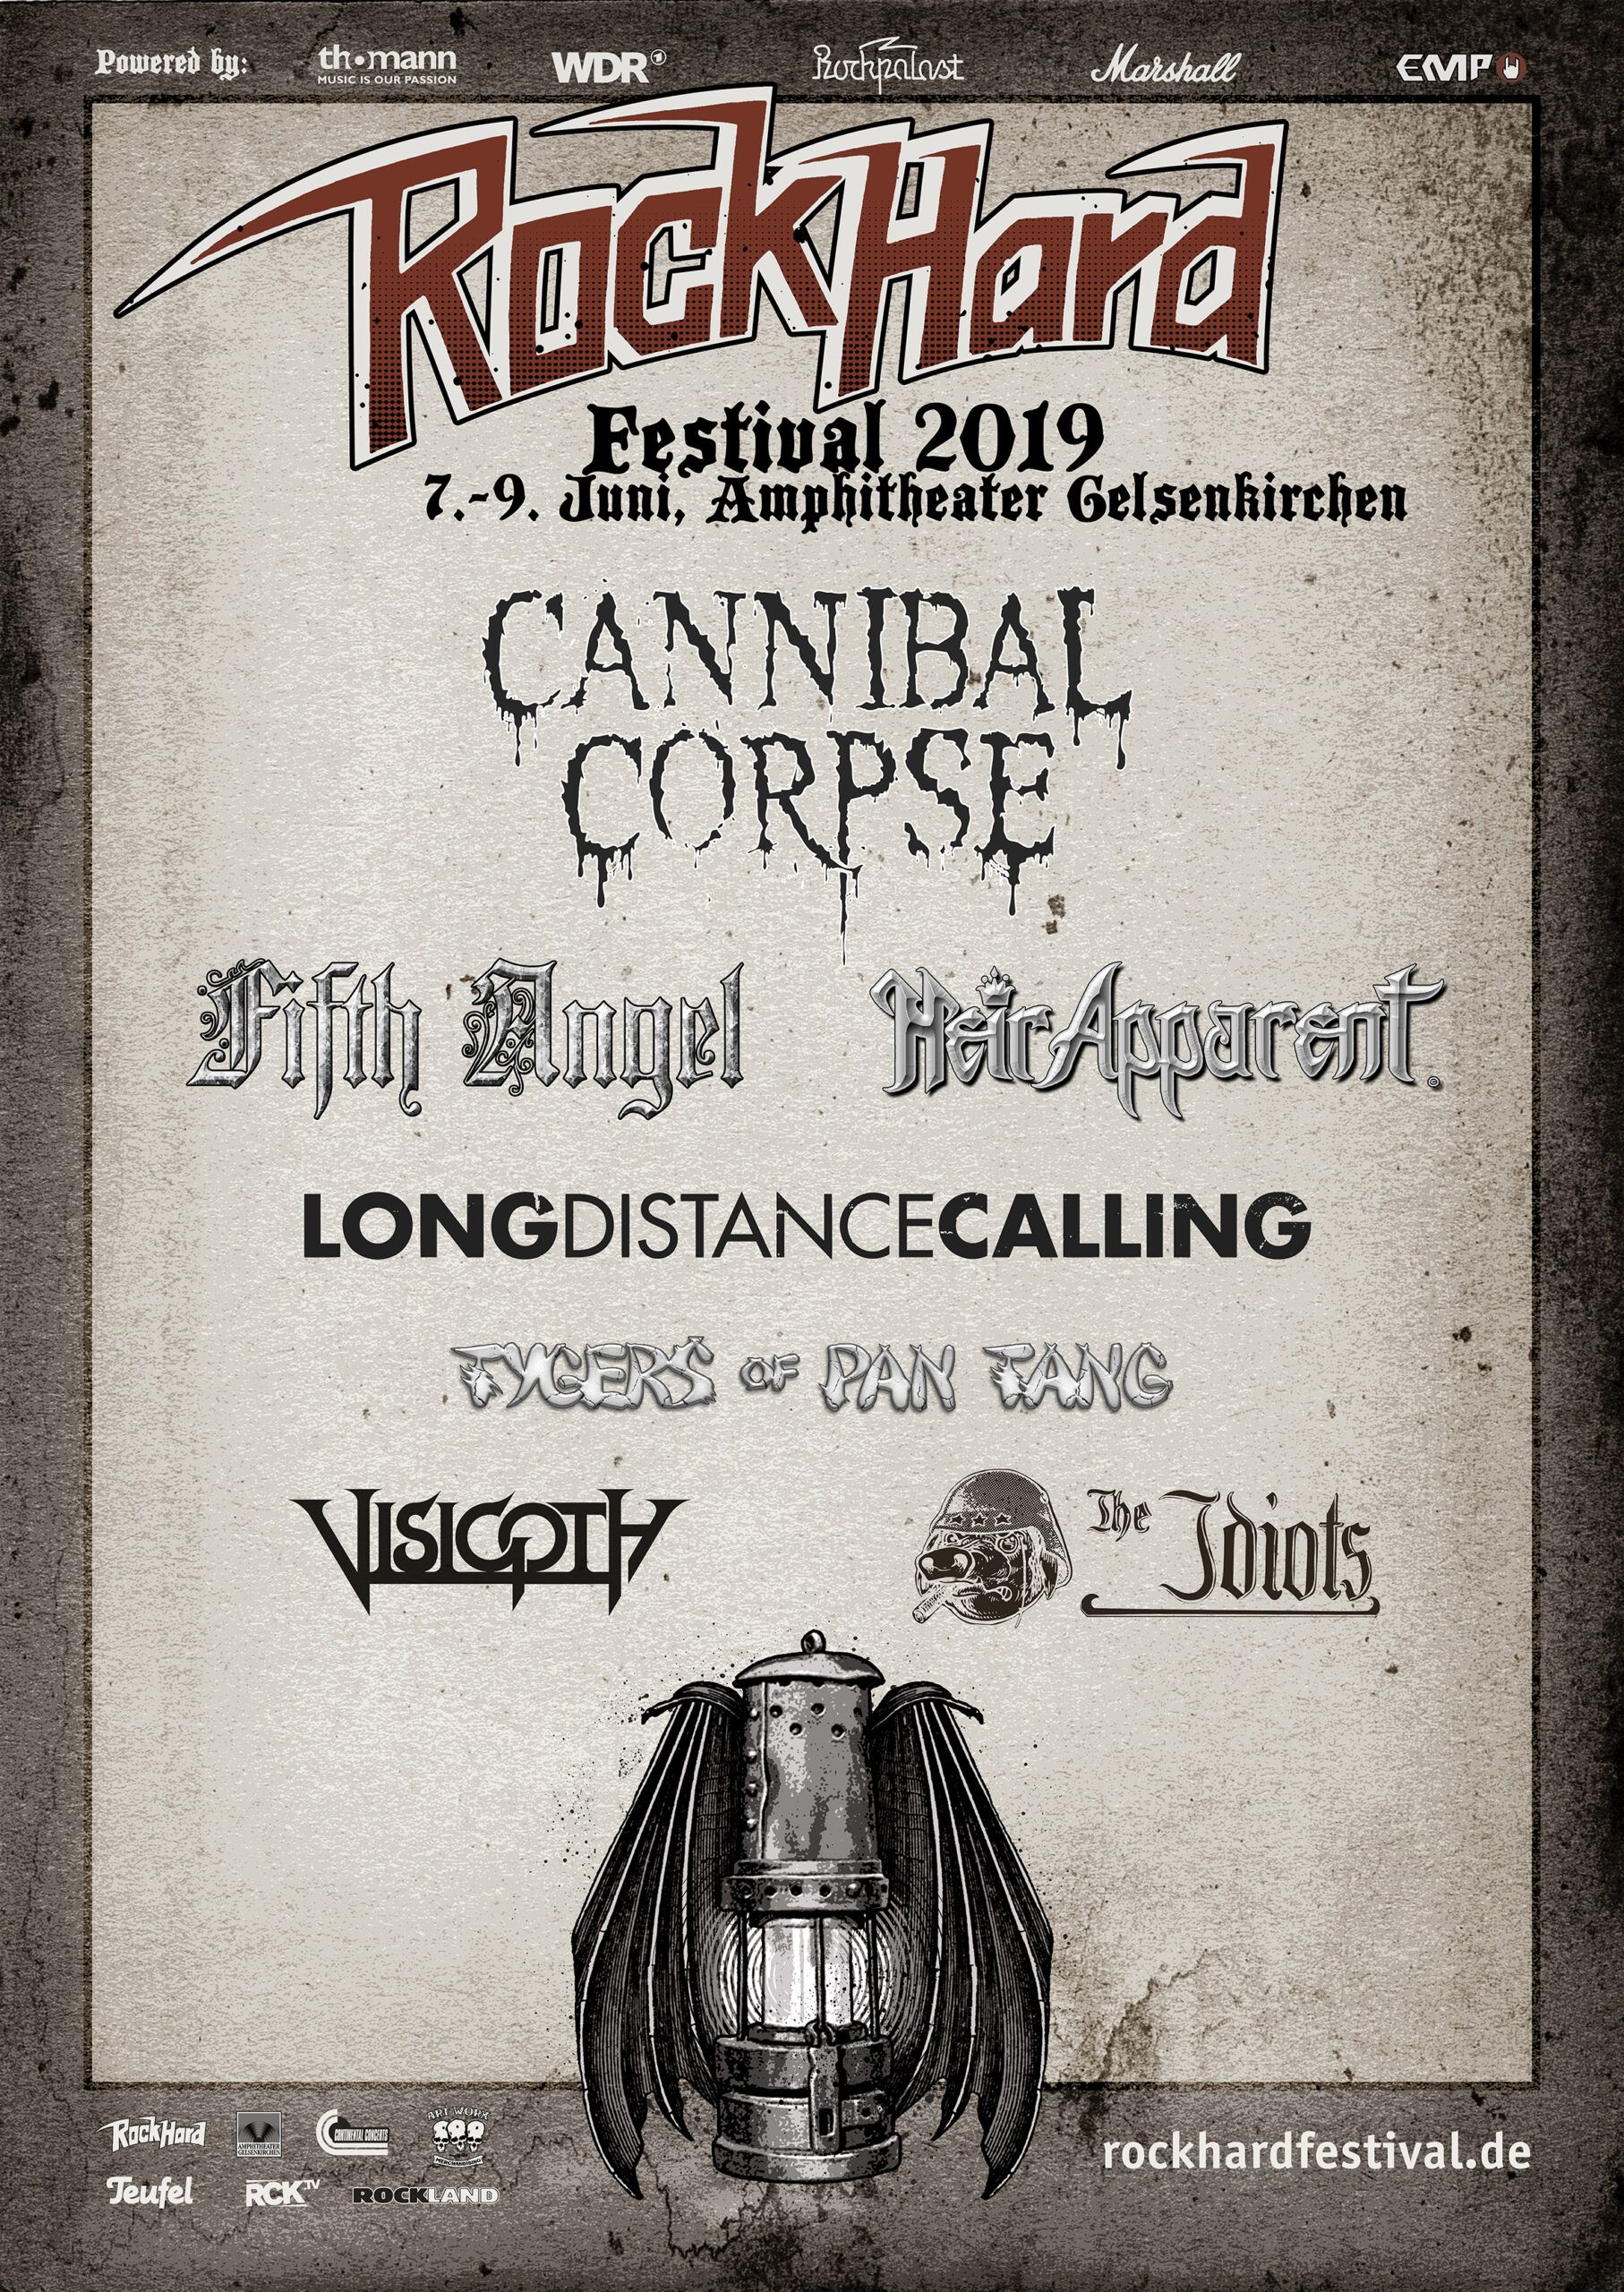 Rock Hard Festival 2019: Cannibal Corpse, Fifth Angel, Long Distance Calling, Heir Apparent, Tygers Of Pan Tang, Visigoth und The Idiots bestätigt